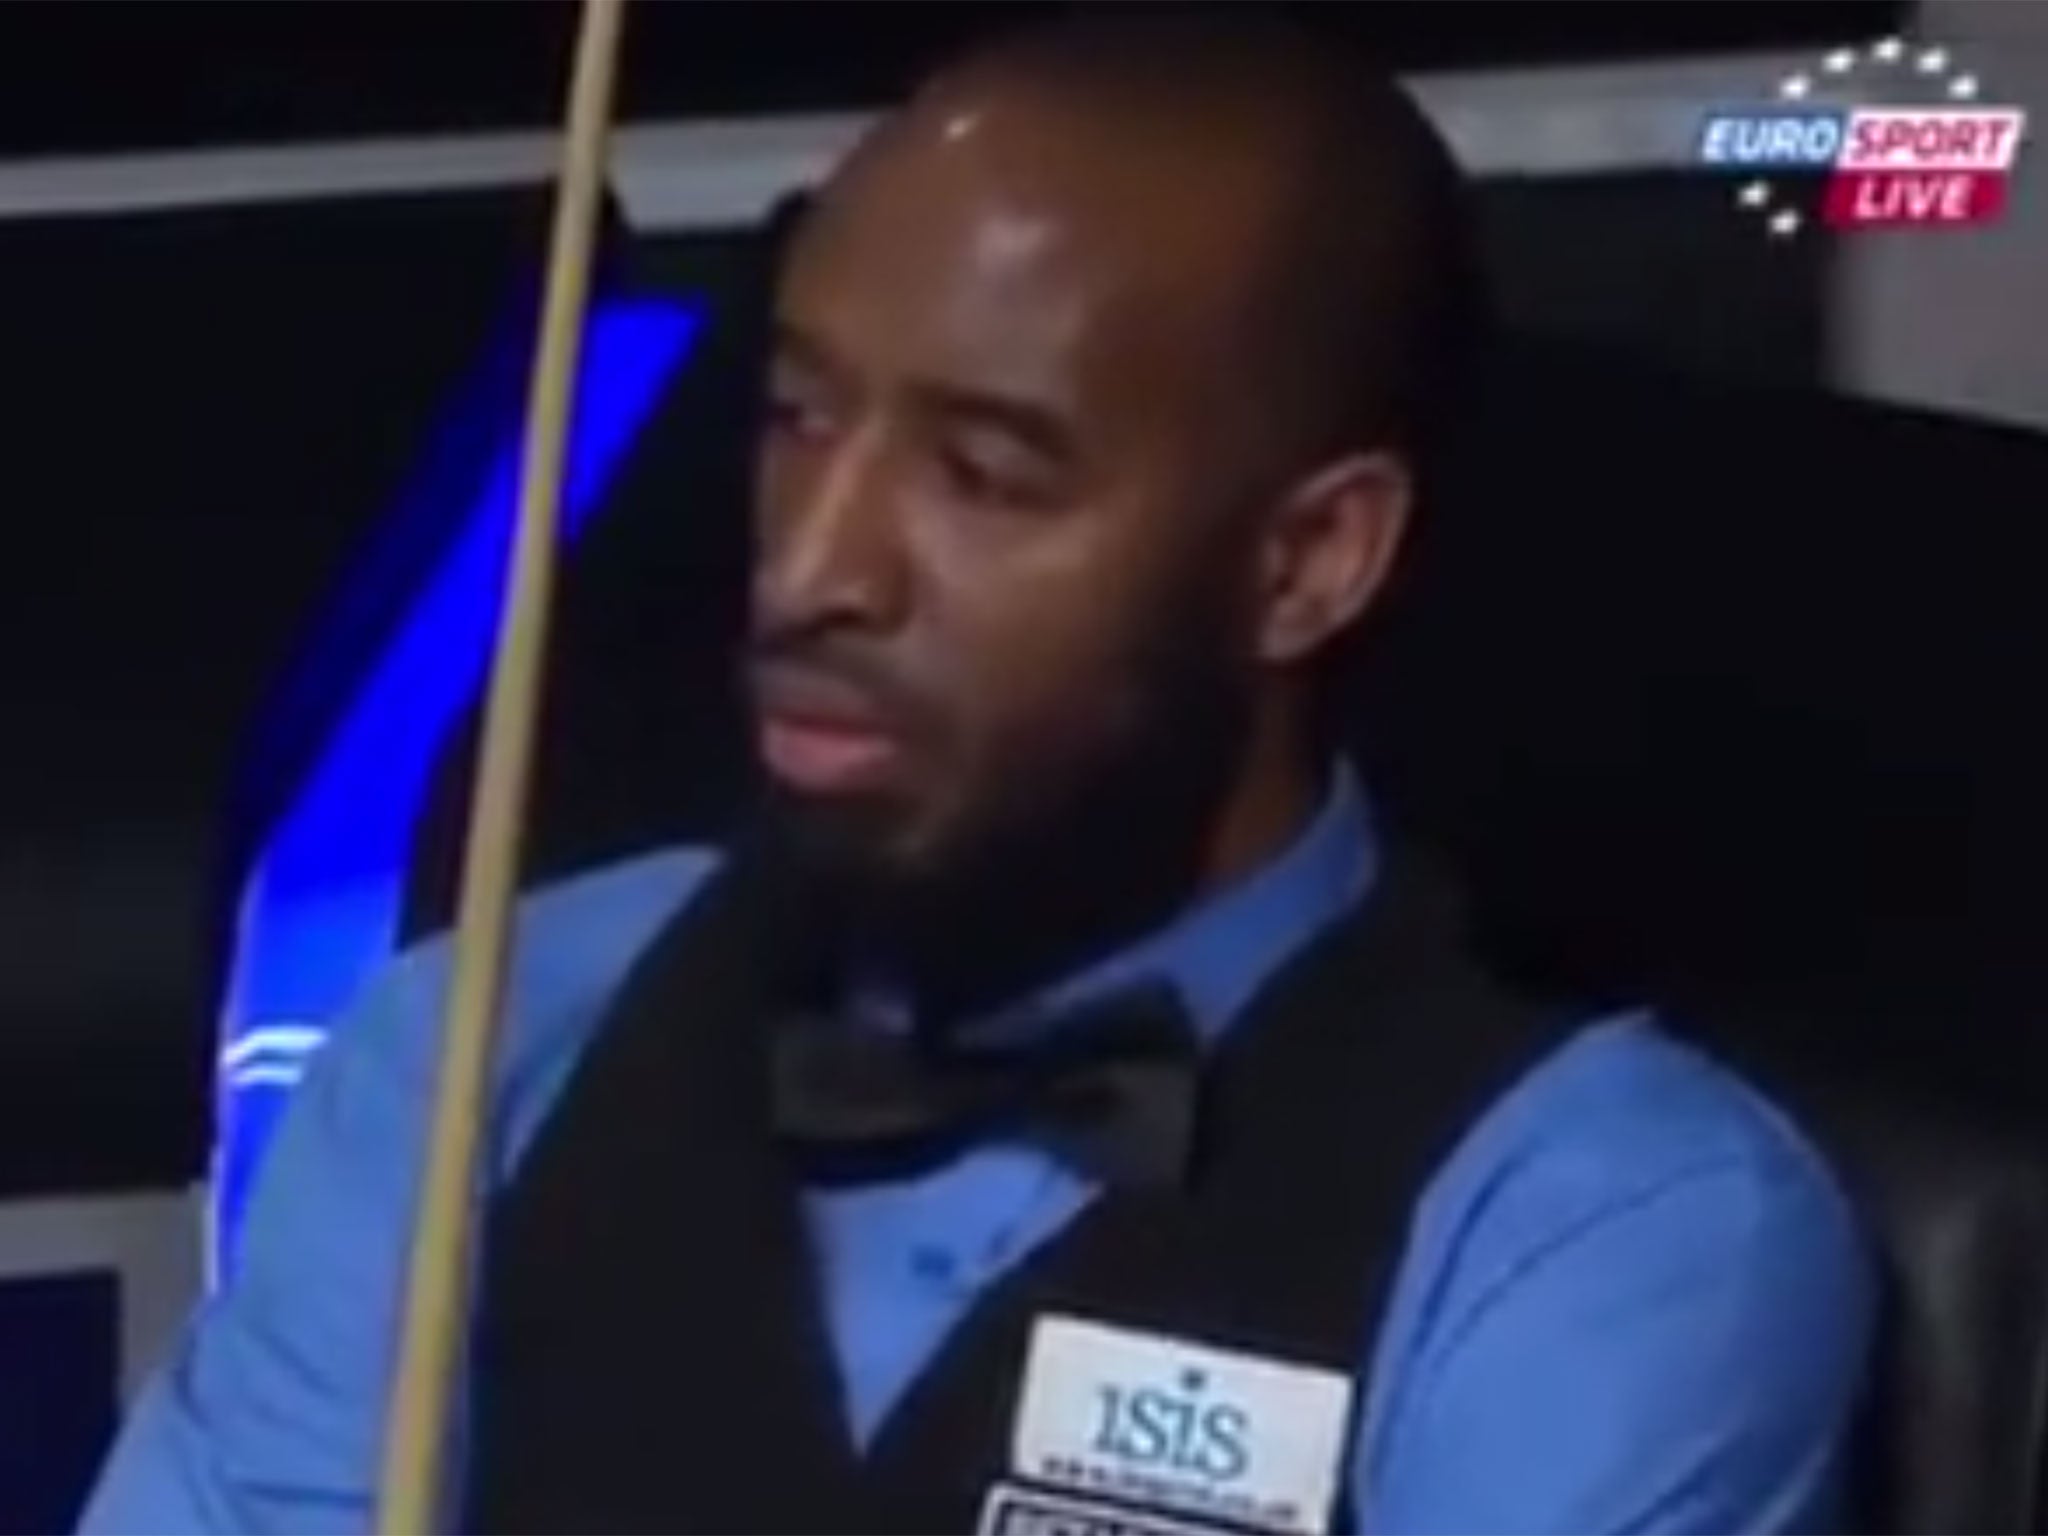 Muslim snooker player Rory McLeod explains reason behind Isis badge during Welsh Open The Independent The Independent